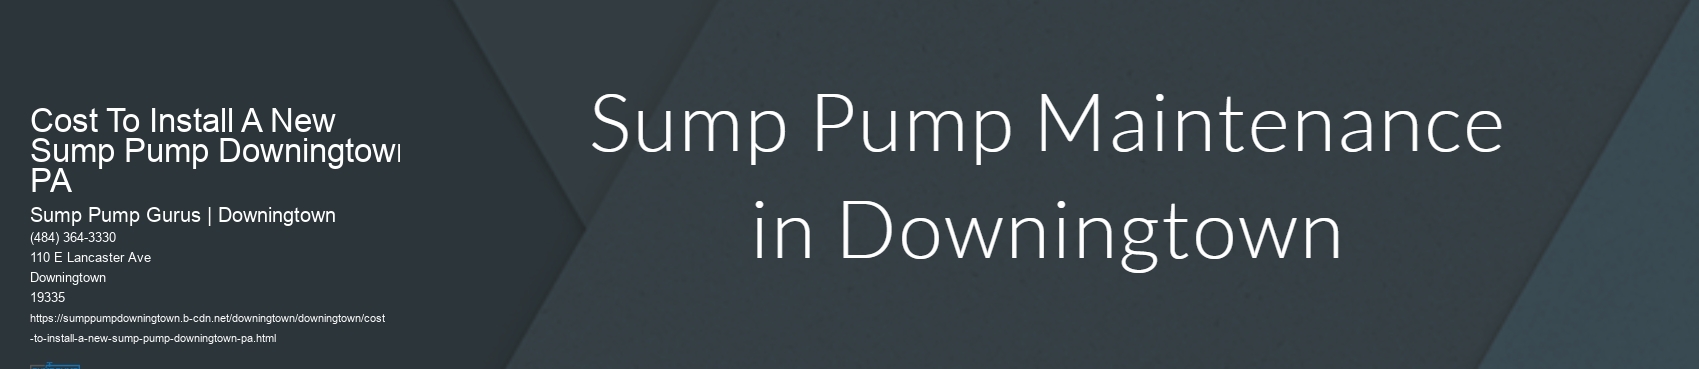 Cost To Install A New Sump Pump Downingtown, PA